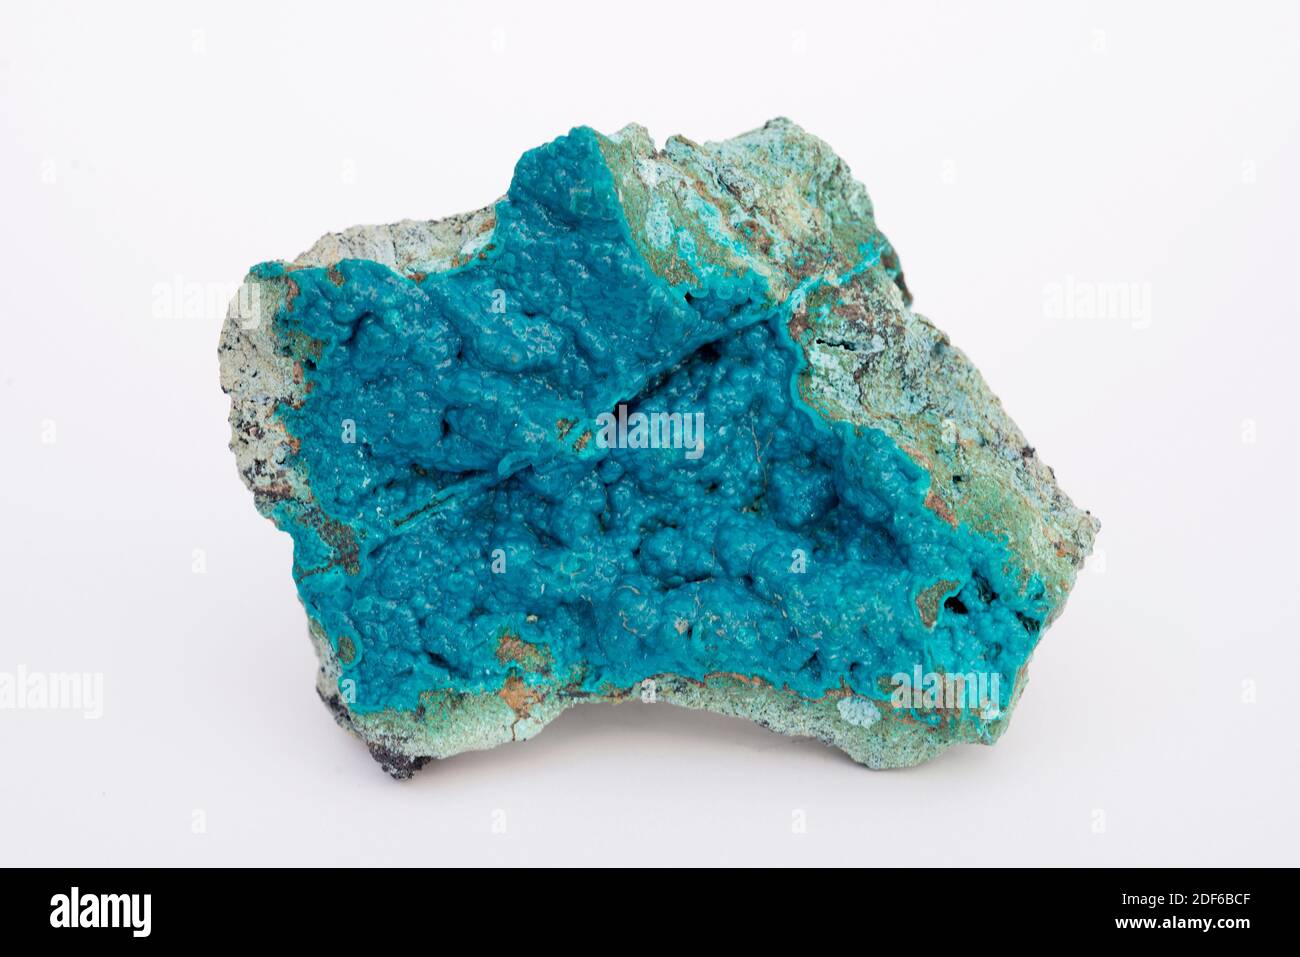 Chrysocolla is an hydrated phyllosilicate mineral composed by silica, copper and aluminium. This sample comes from Democratic Republic of Congo. Stock Photo